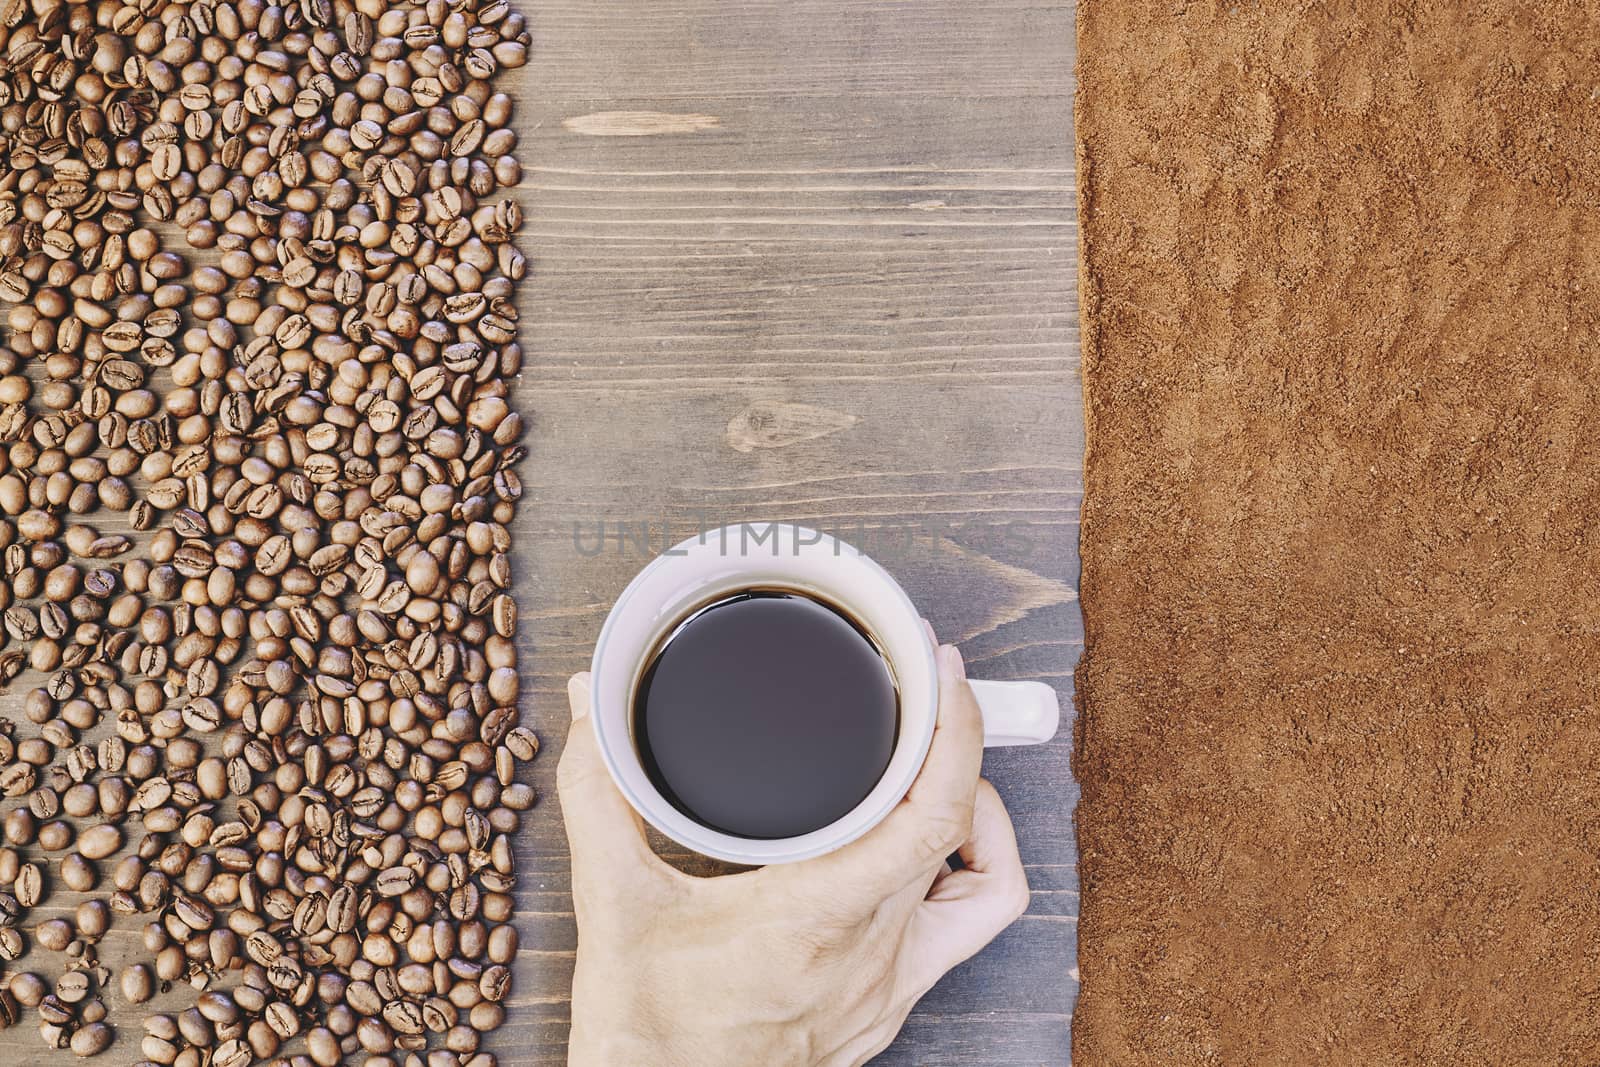 Top view of a person holding a cup of coffee with roasted and ground coffee beans on the table